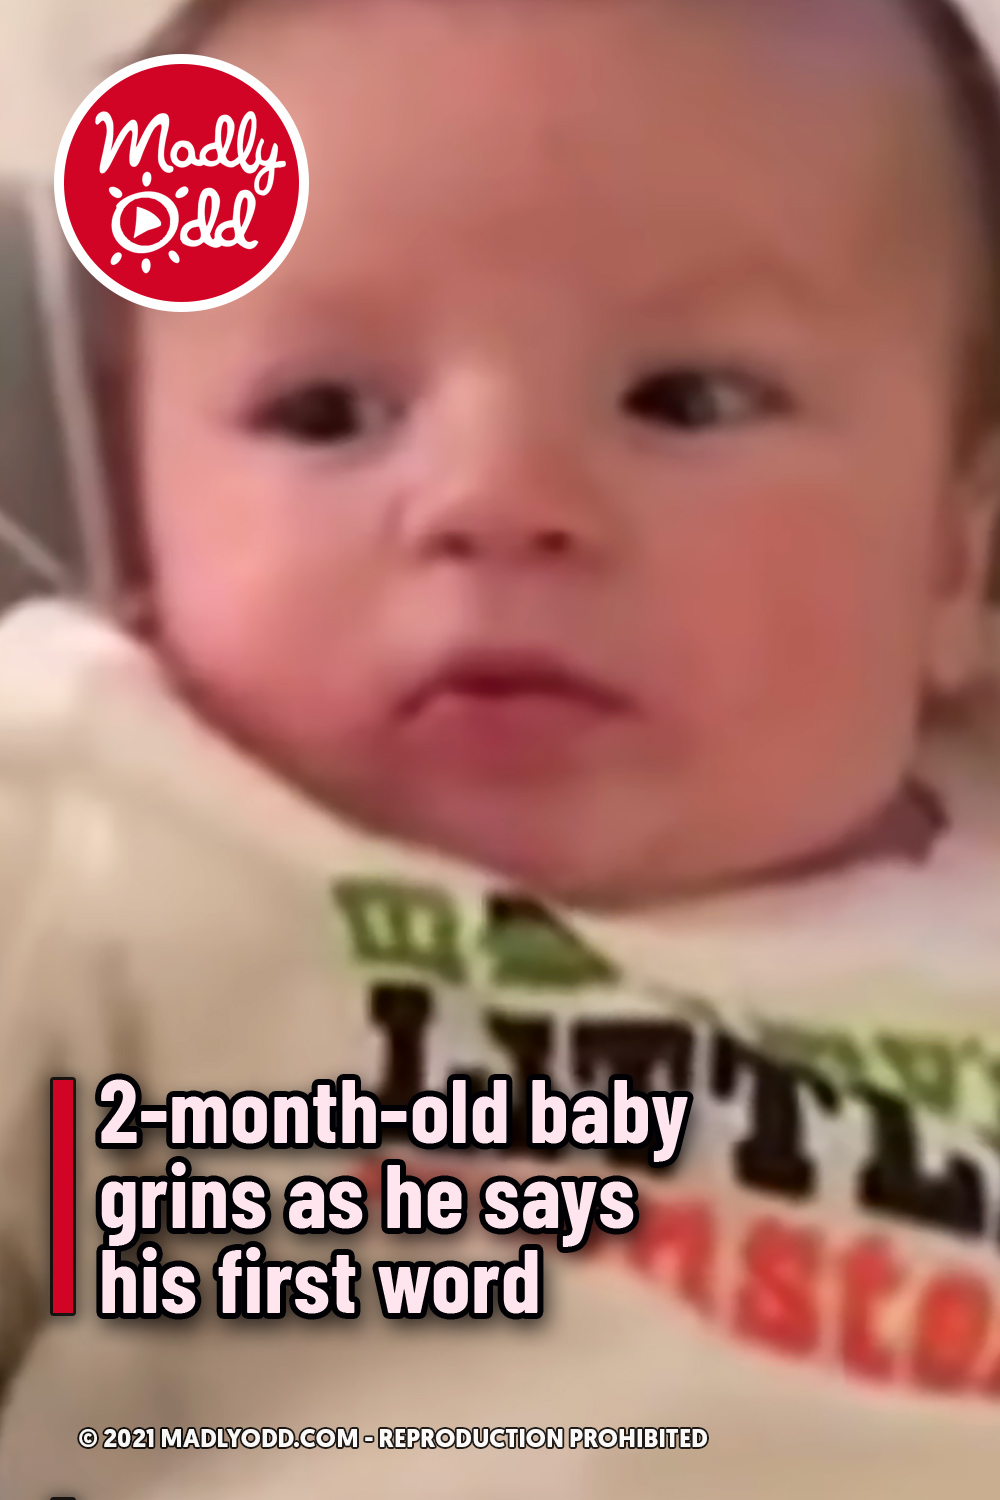 2-month-old baby grins as he says his first word